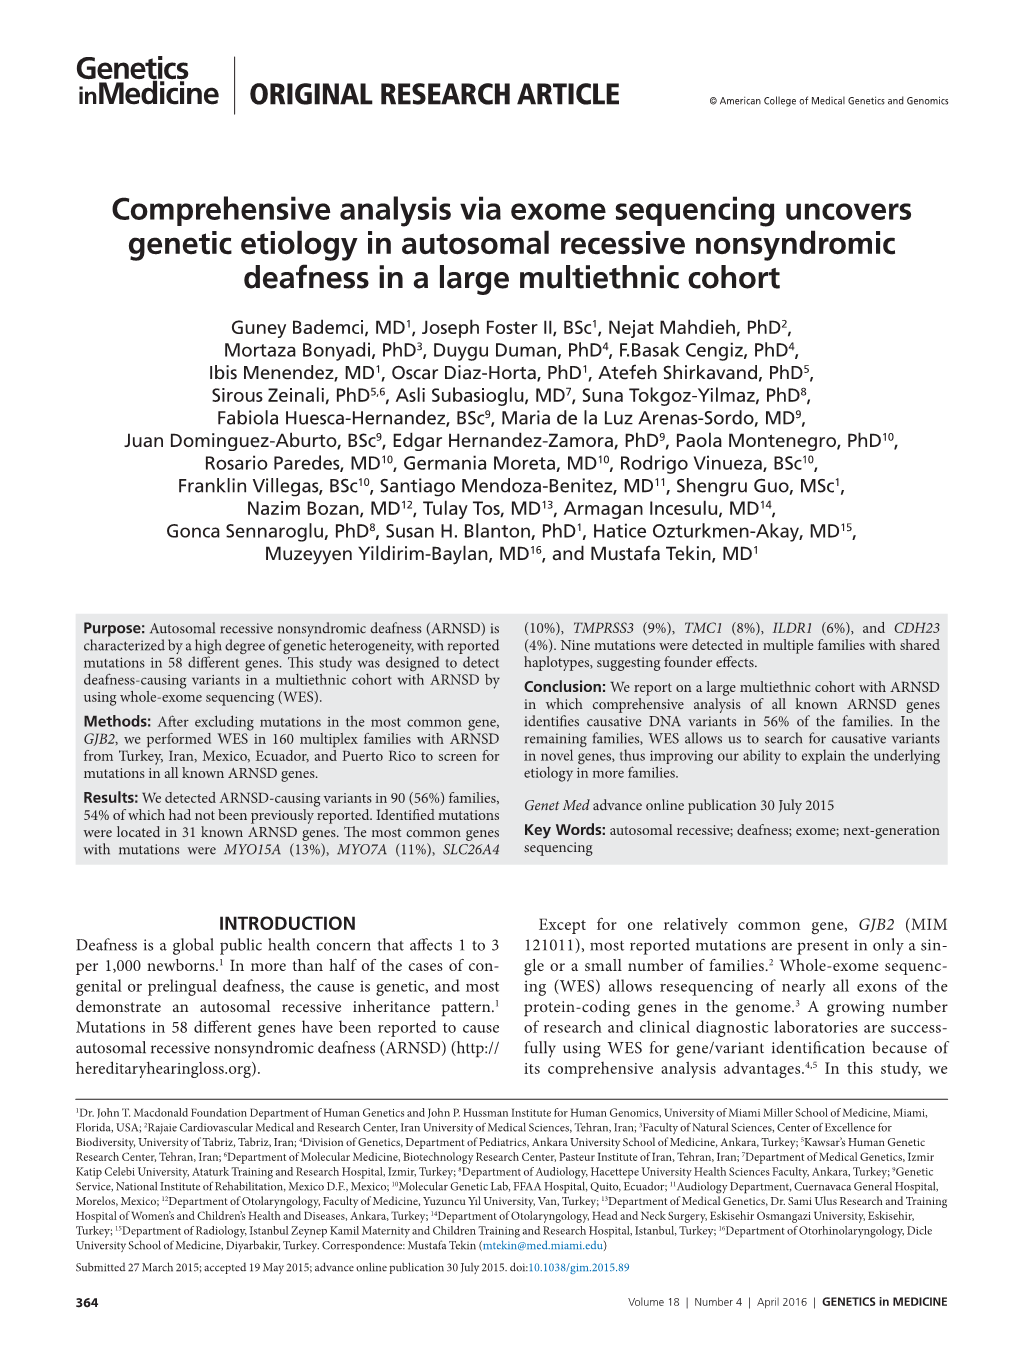 Comprehensive Analysis Via Exome Sequencing Uncovers Genetic Etiology in Autosomal Recessive Nonsyndromic Deafness in a Large Multiethnic Cohort